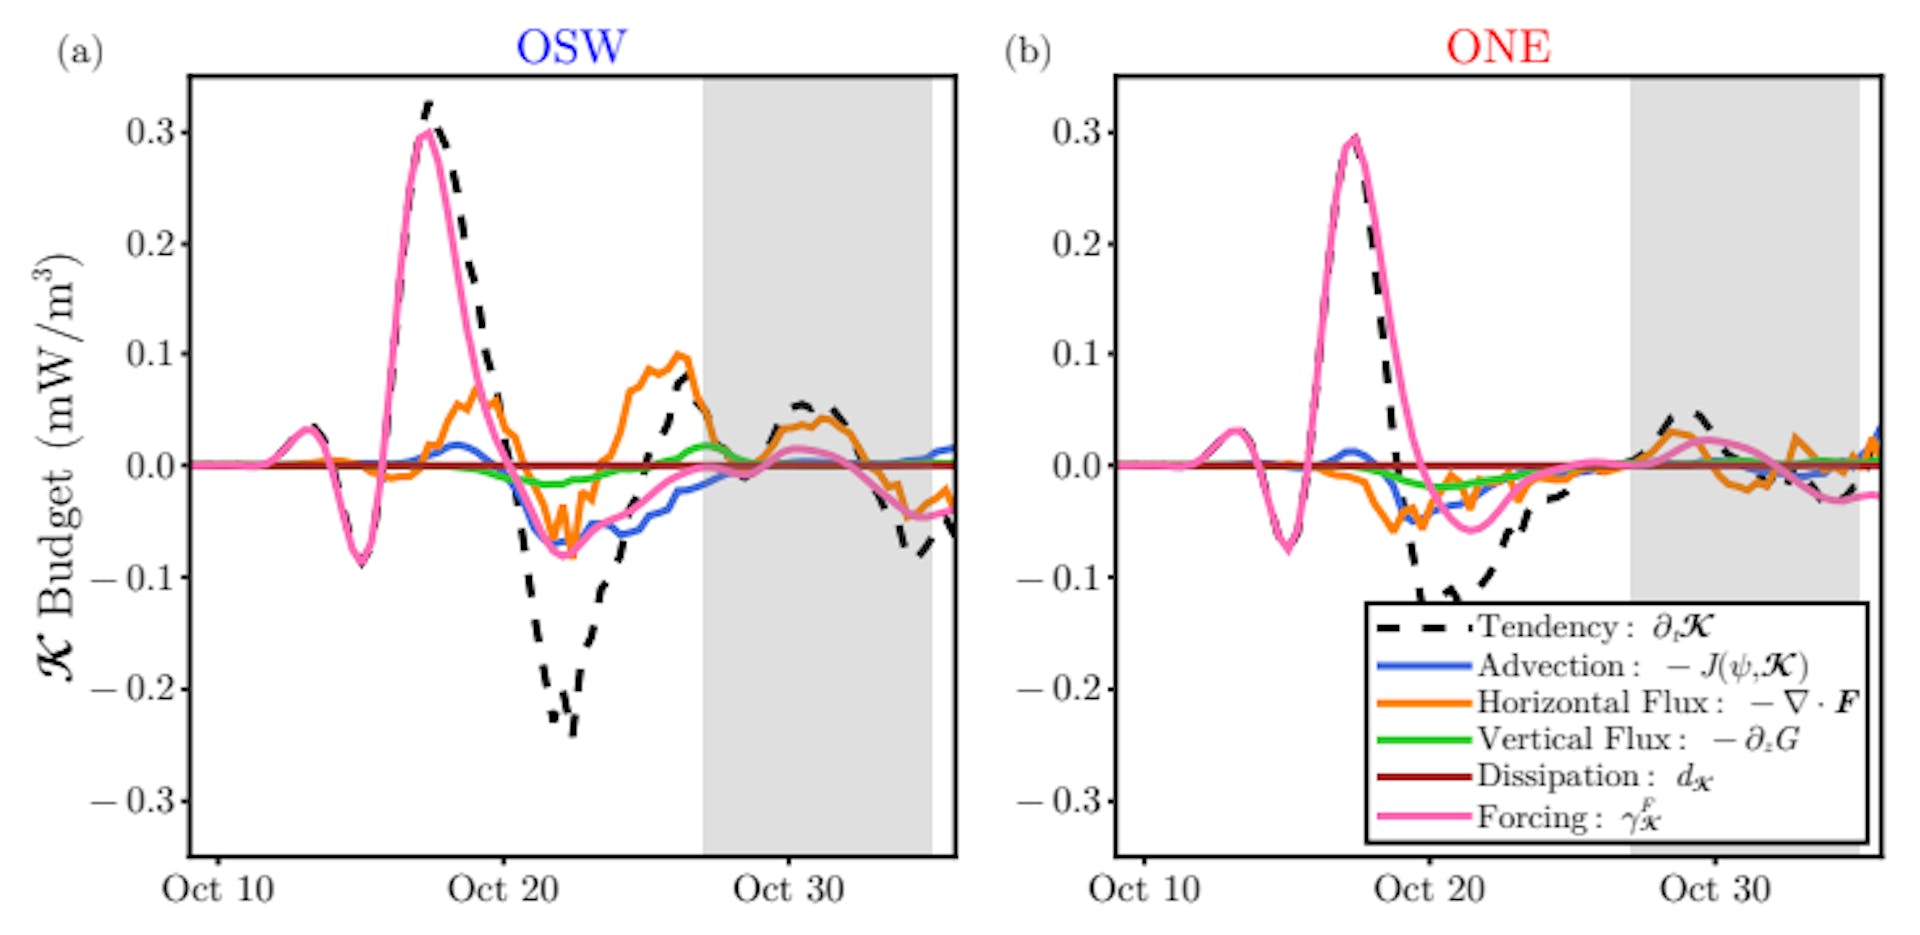 Fig. 4. (a) NIW kinetic energy budget terms. The kinetic energy tendency (dashed line) is decomposed into the 5 processes in the model which can change the kinetic energy: advection (blue), horizontal flux divergence (orange), vertical flux divergence (green), hyperviscosity (brown) and wind forcing (pink). The budgets are evaluated at the horizontal position of the moorings and at fixed depth of 25 m. (b) As in (a) but for the ONE mooring. To better visualize the terms we only plot the budget for the first 3/4 of the event.